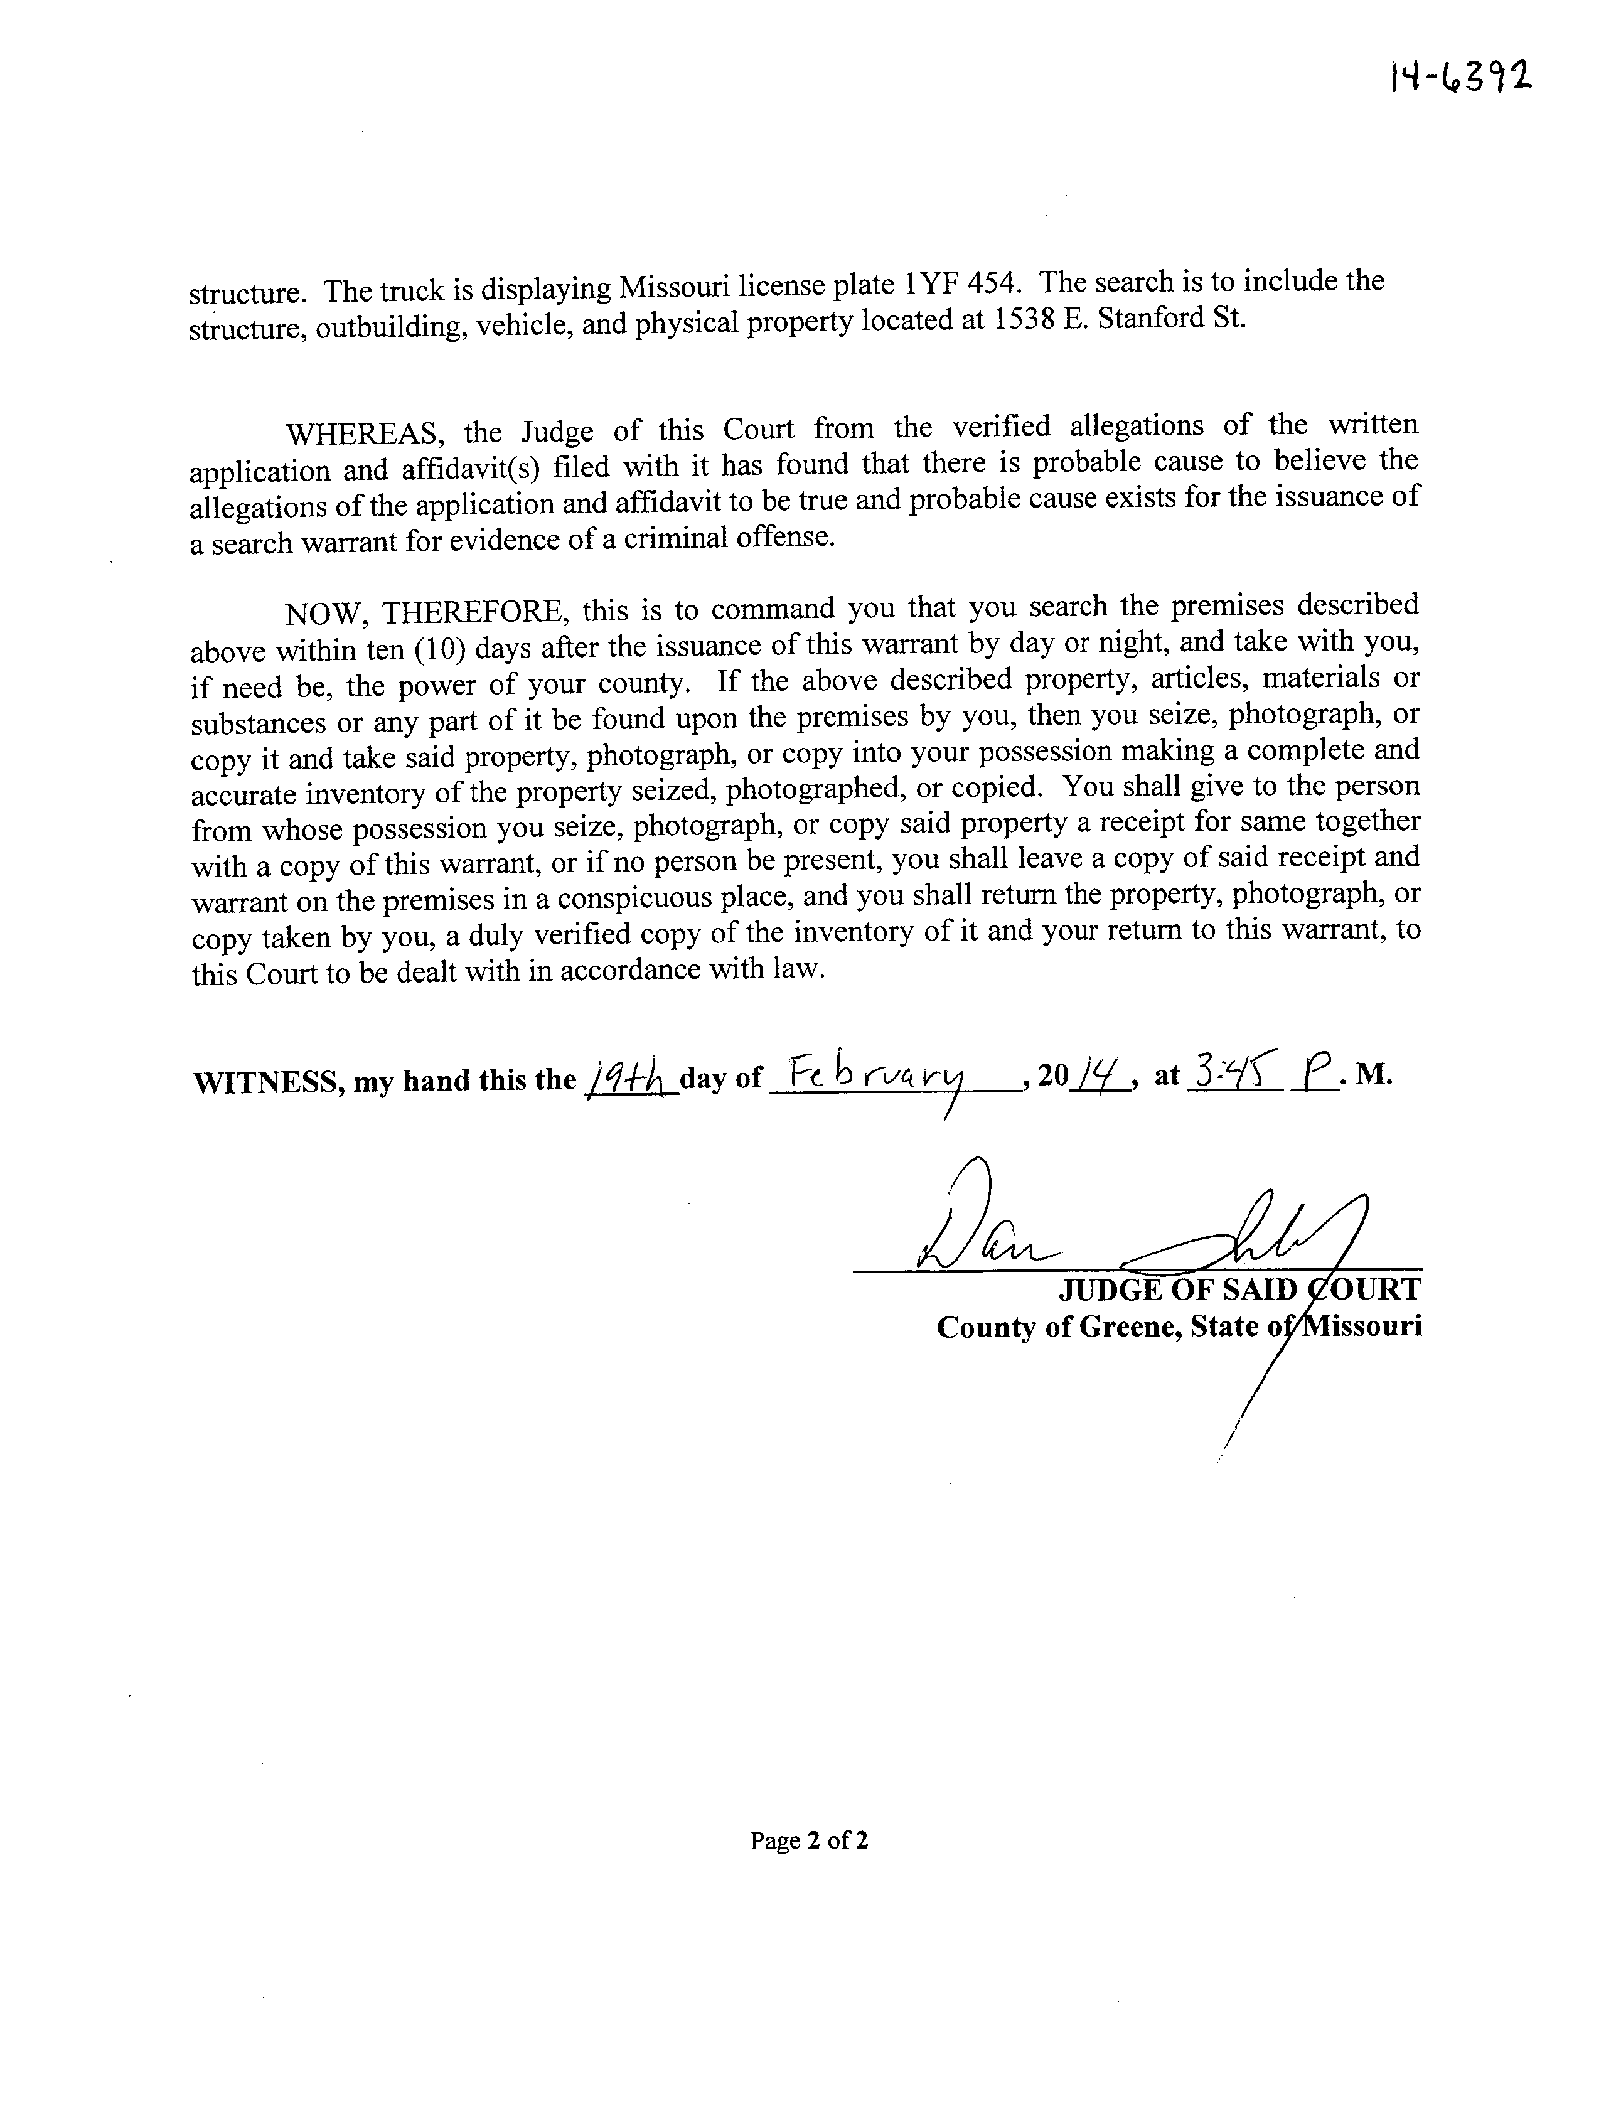 Copy of Search Warrant Return07.png